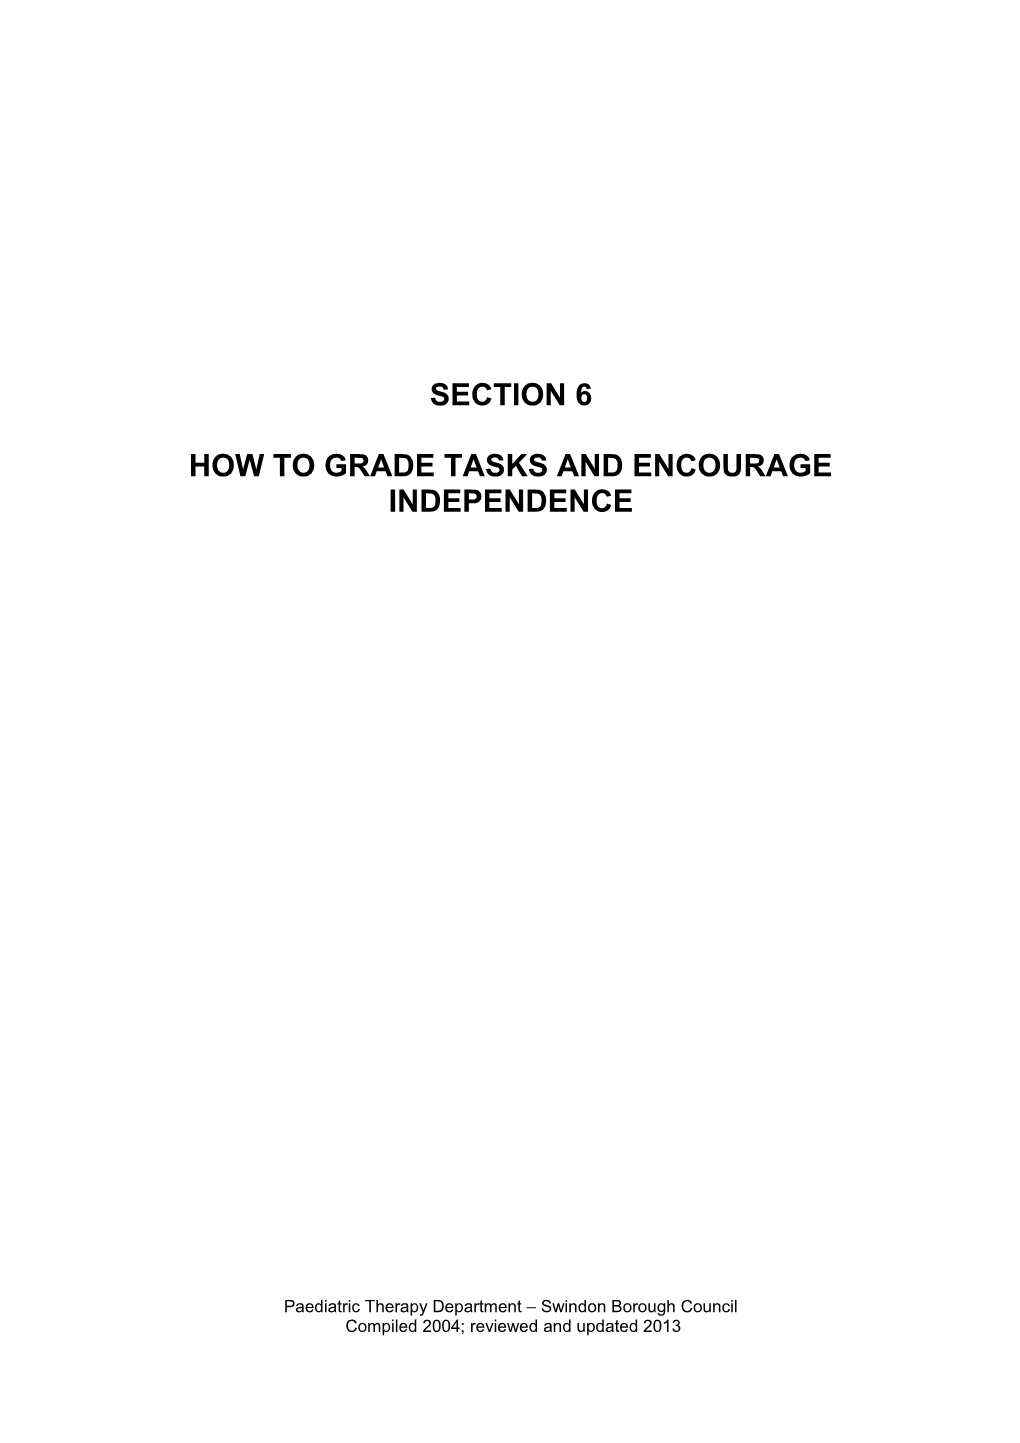 How to Grade Tasks and Encourage Independence